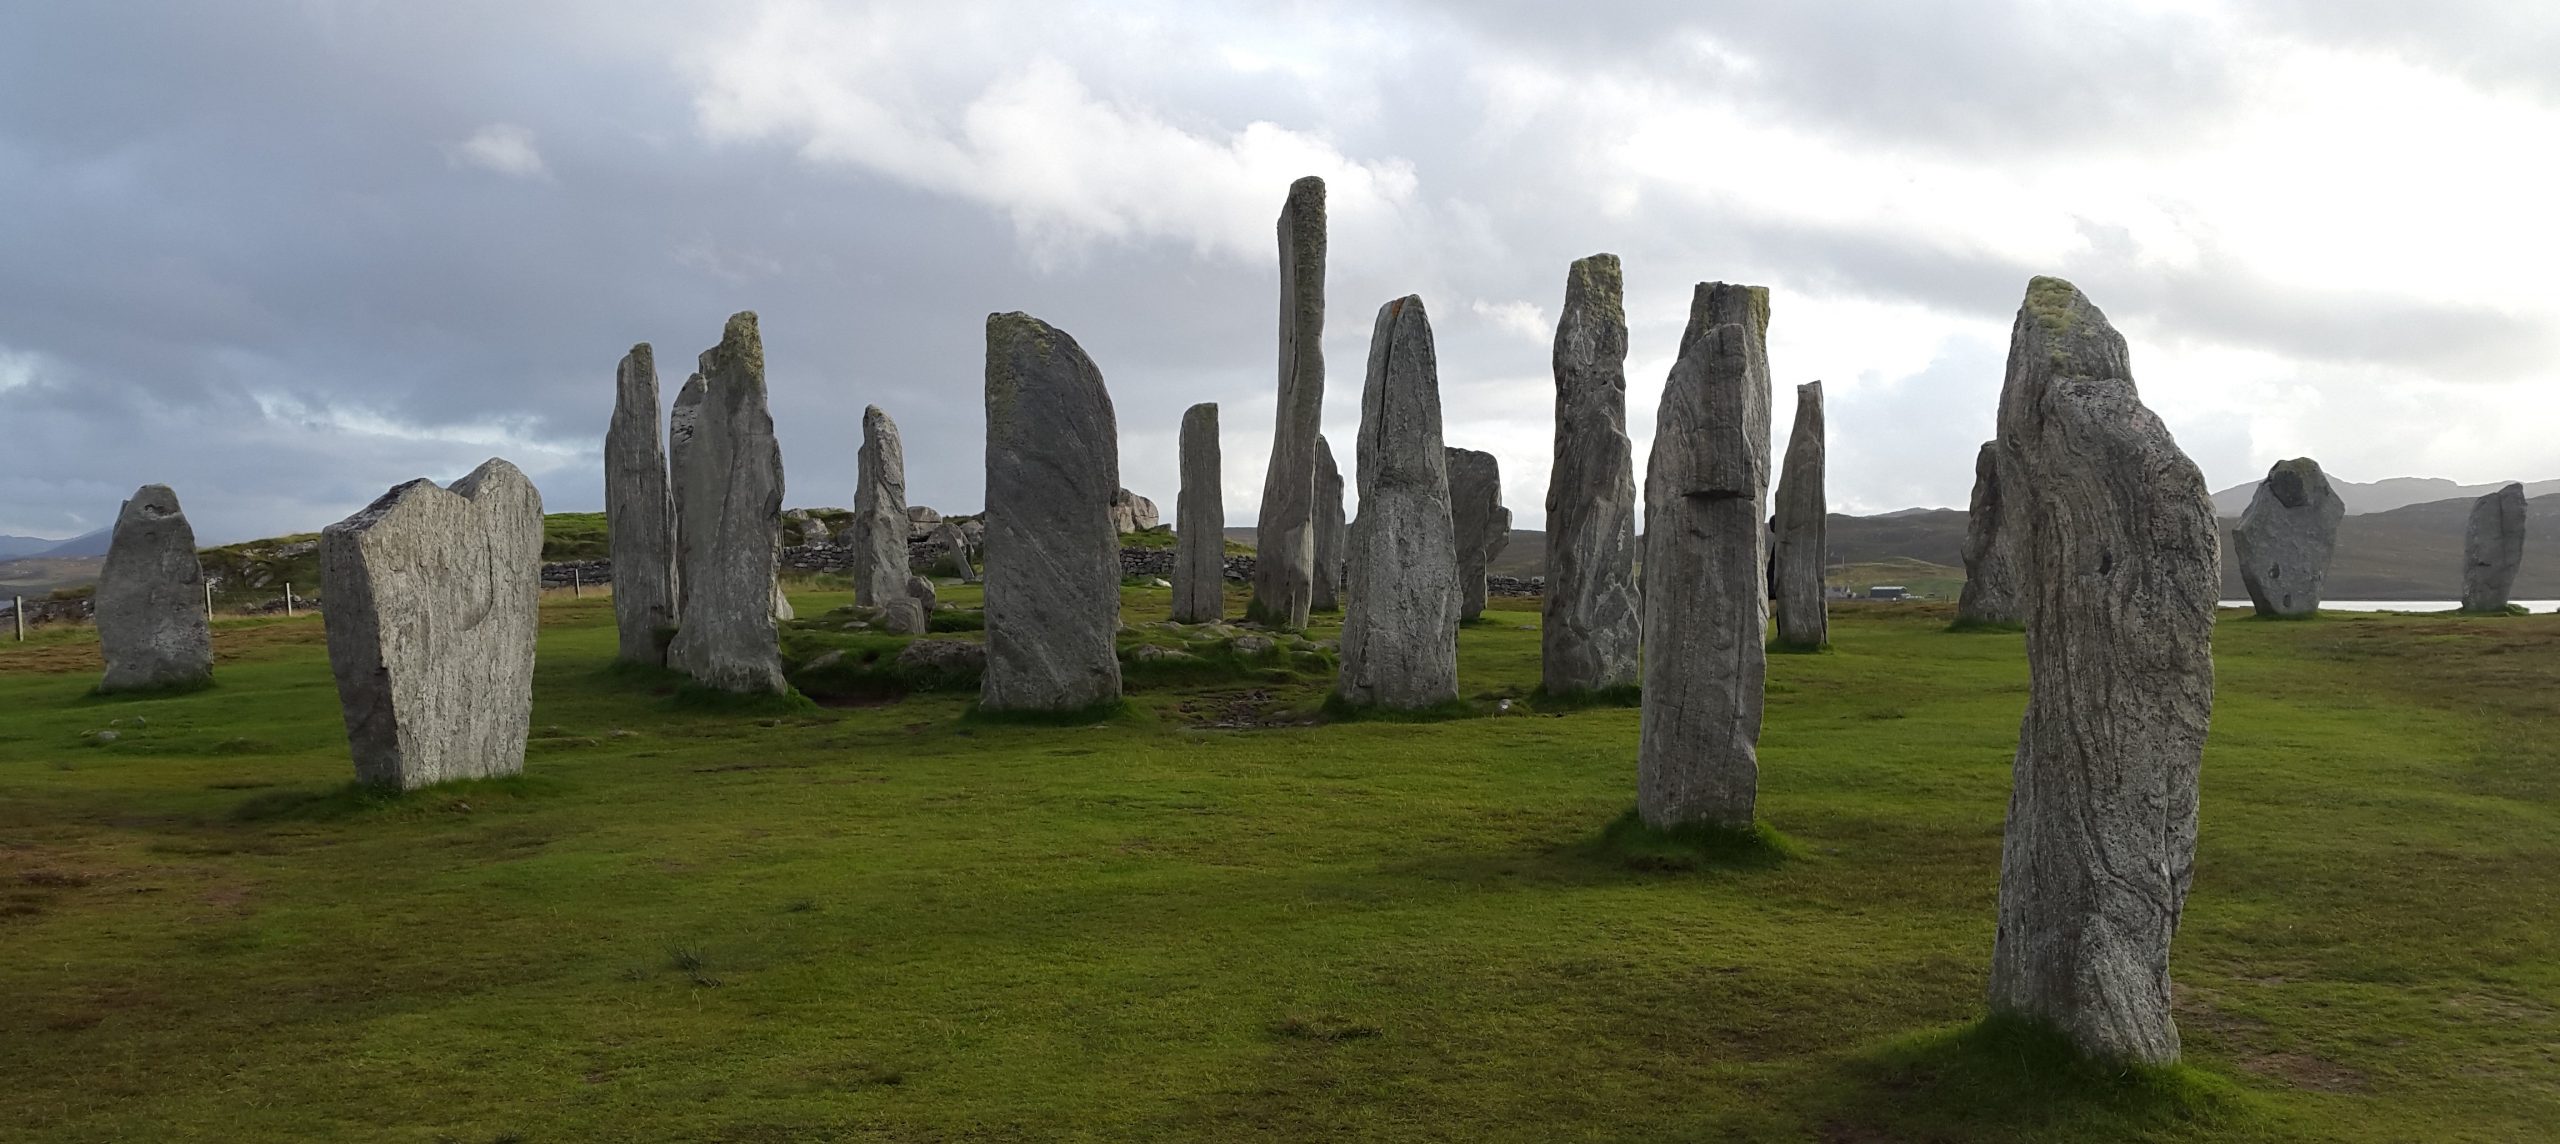 CALLANISH NEOLITHIC STONE CIRCLE AND ITS LASTING EFFECT ON ME:  SEE MY GUEST POST ON WANDERLUSTERS BLOG